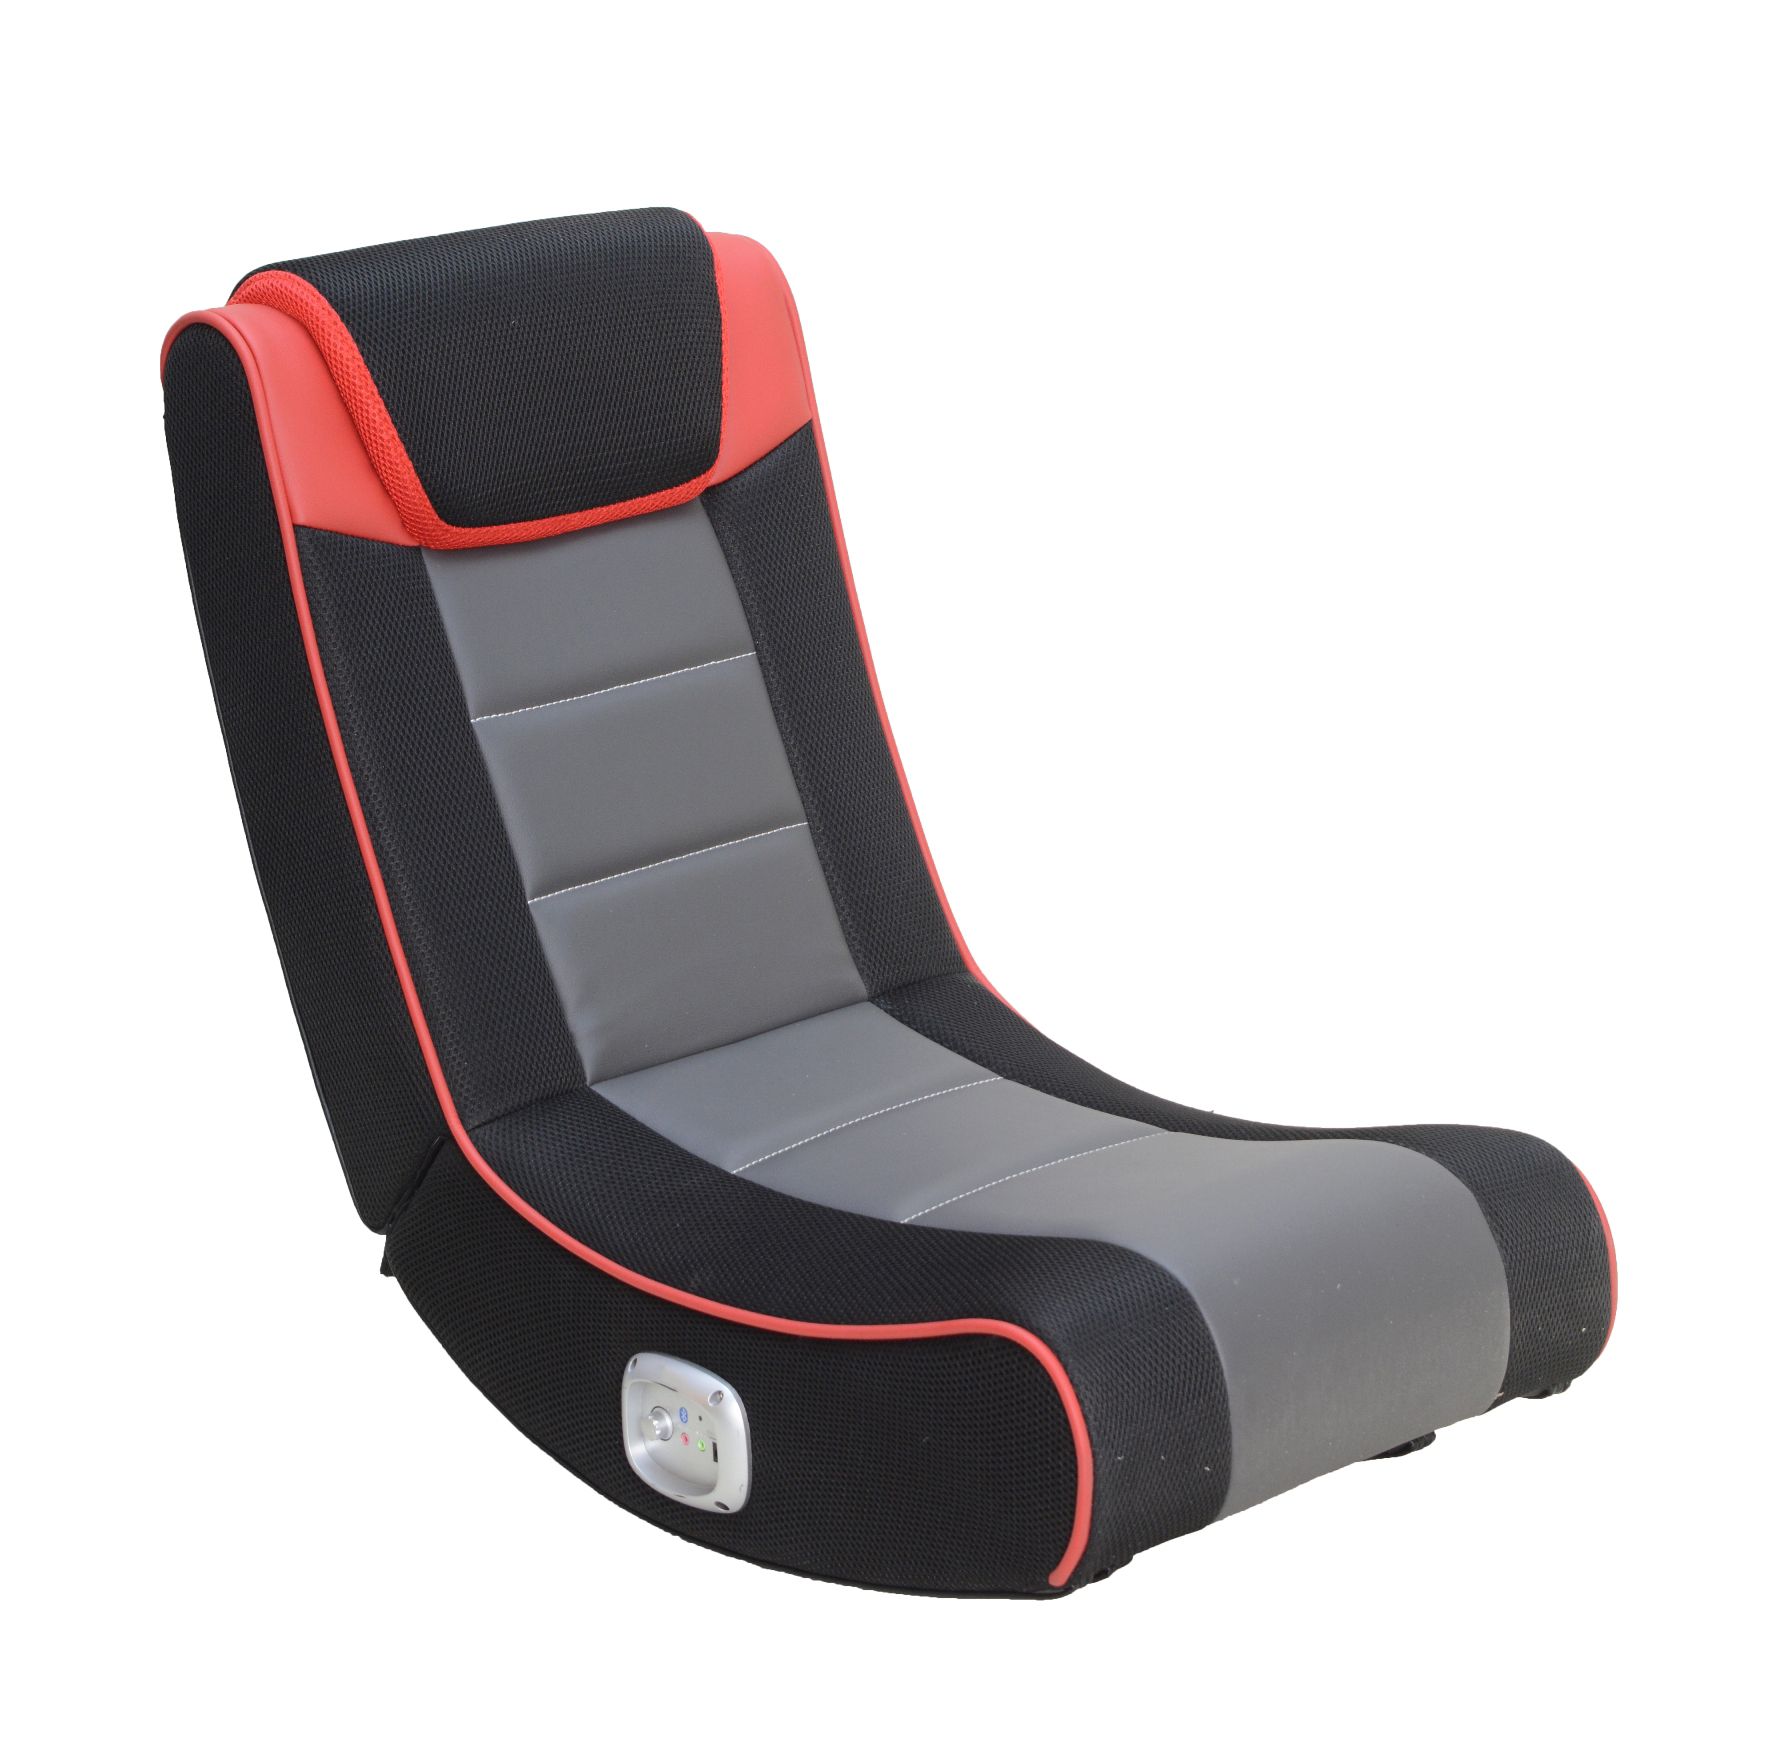 How to Maximize Your Gaming Experience with a Ps3: Setup a Gaming Chair X Rocker